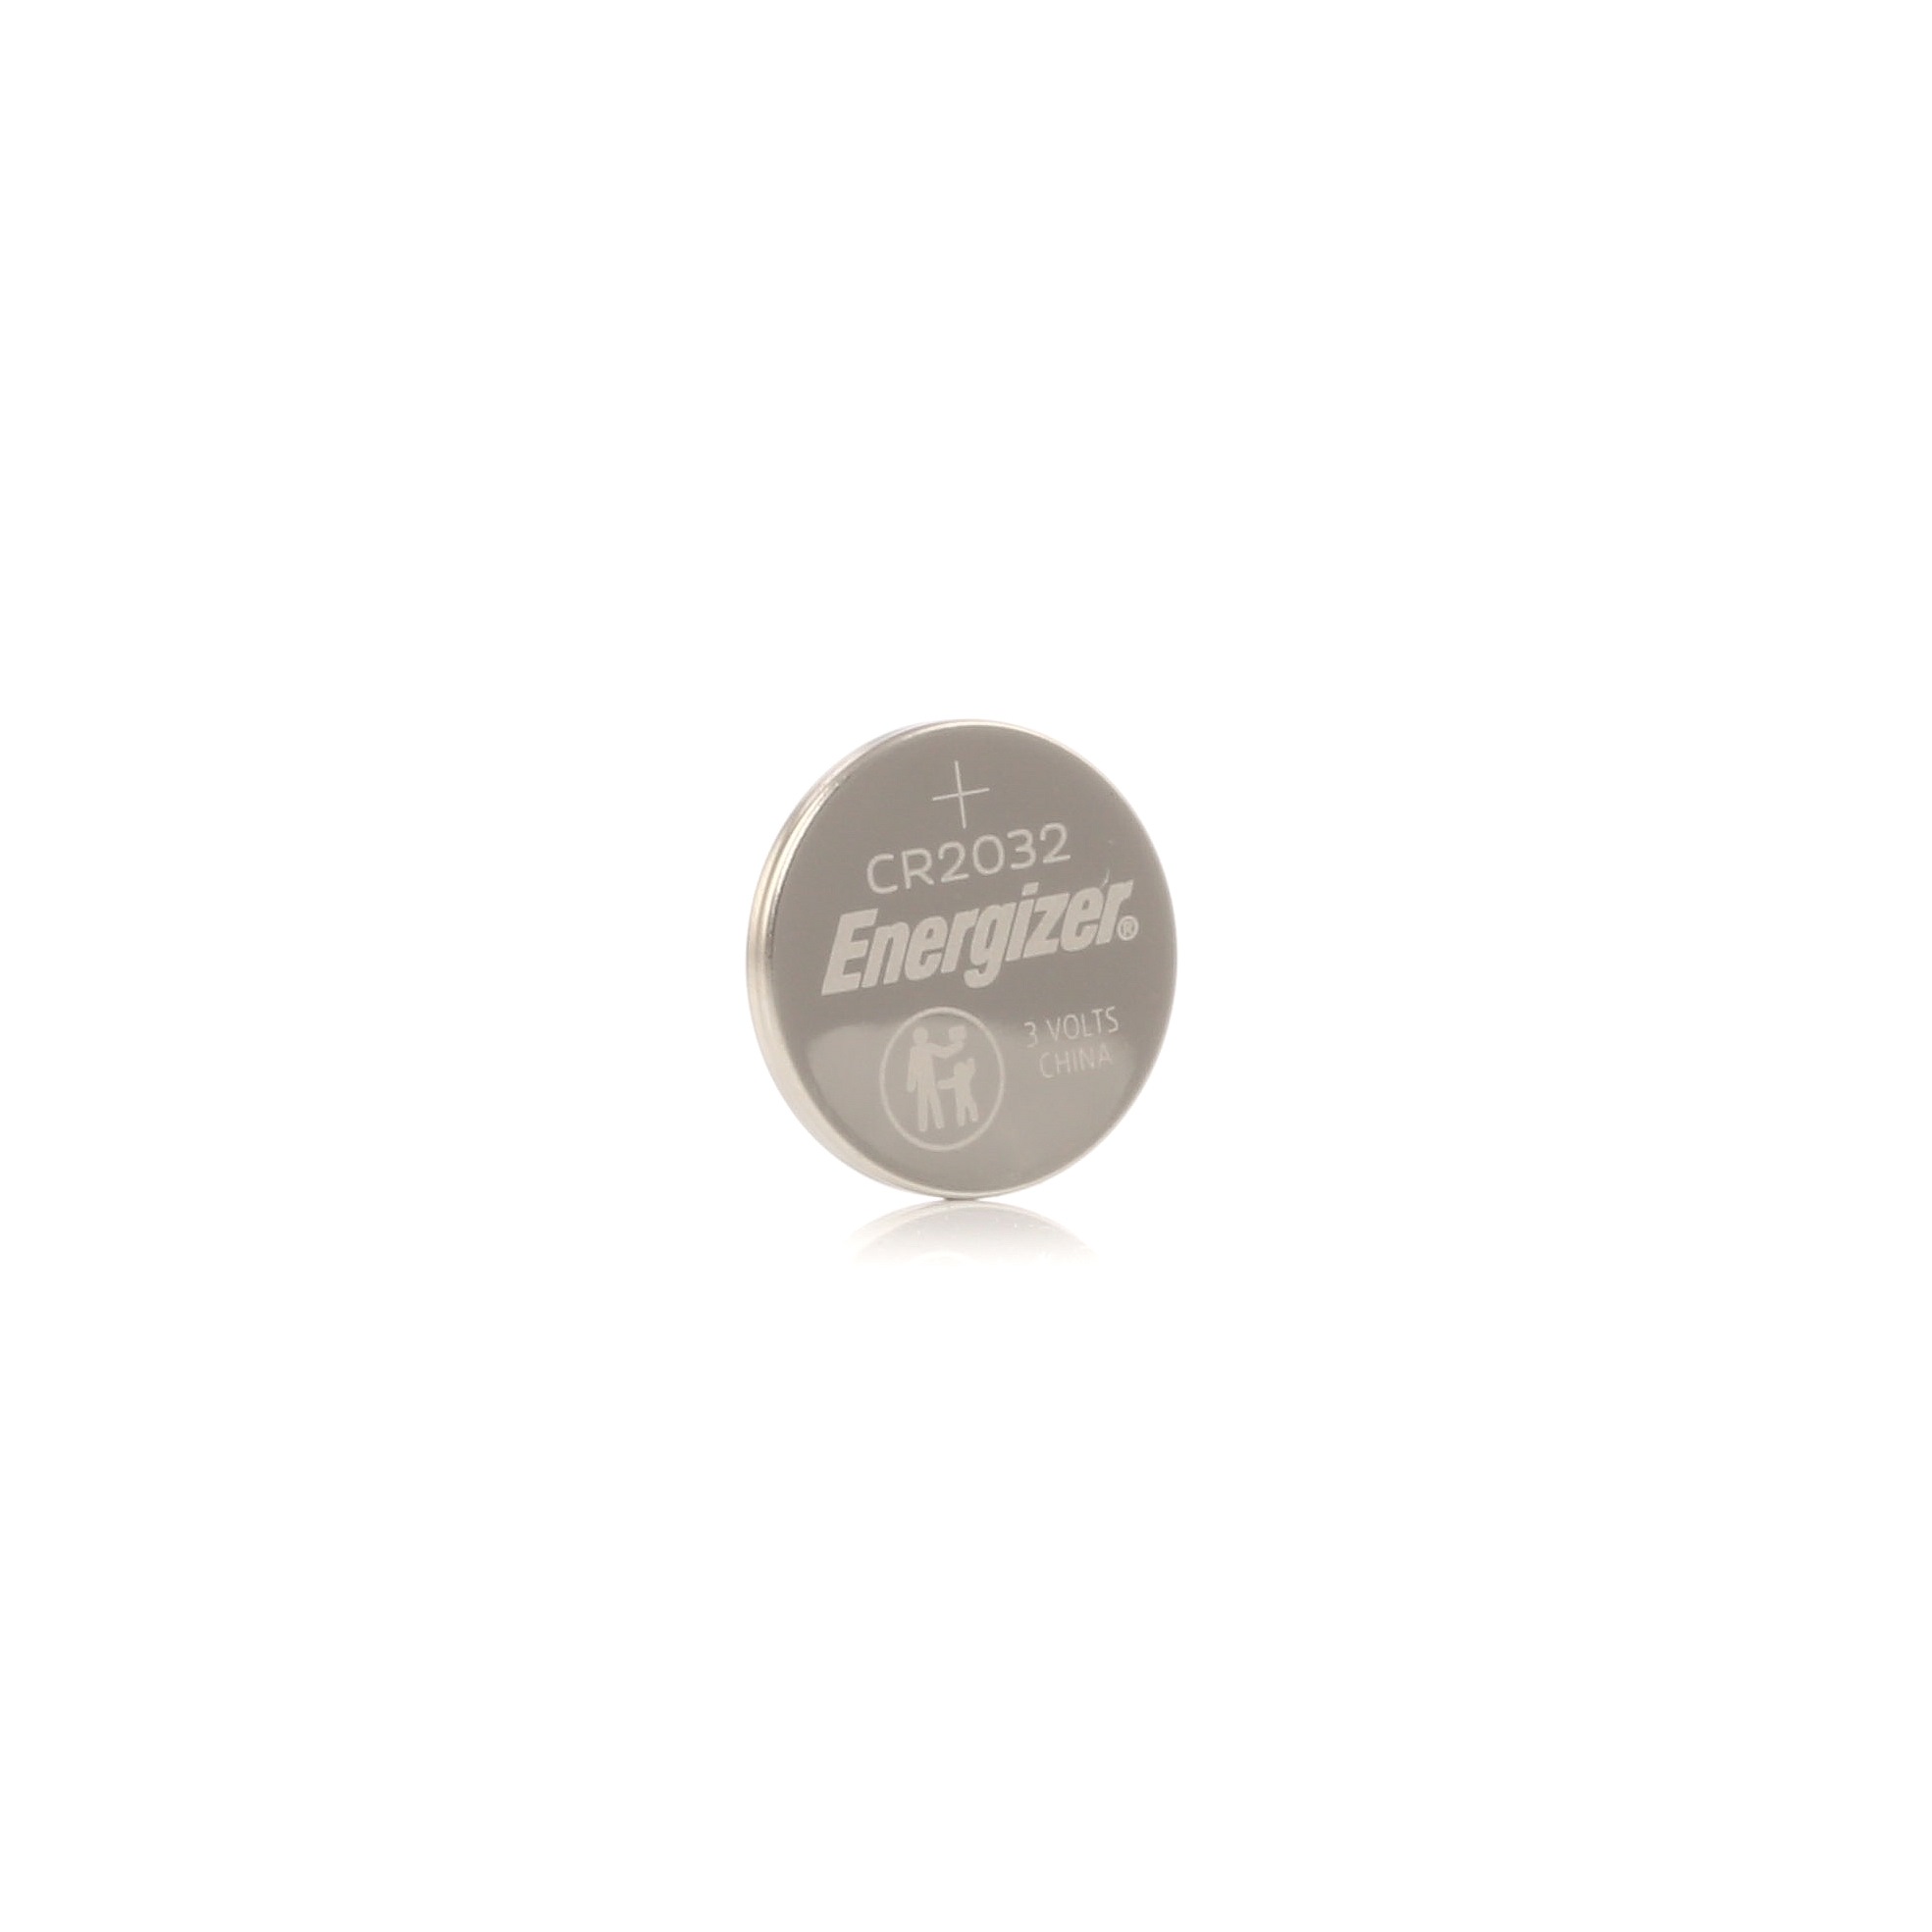 ENERGIZER CR 2032 635801 Button cell battery 3V, 235mAh, Piece